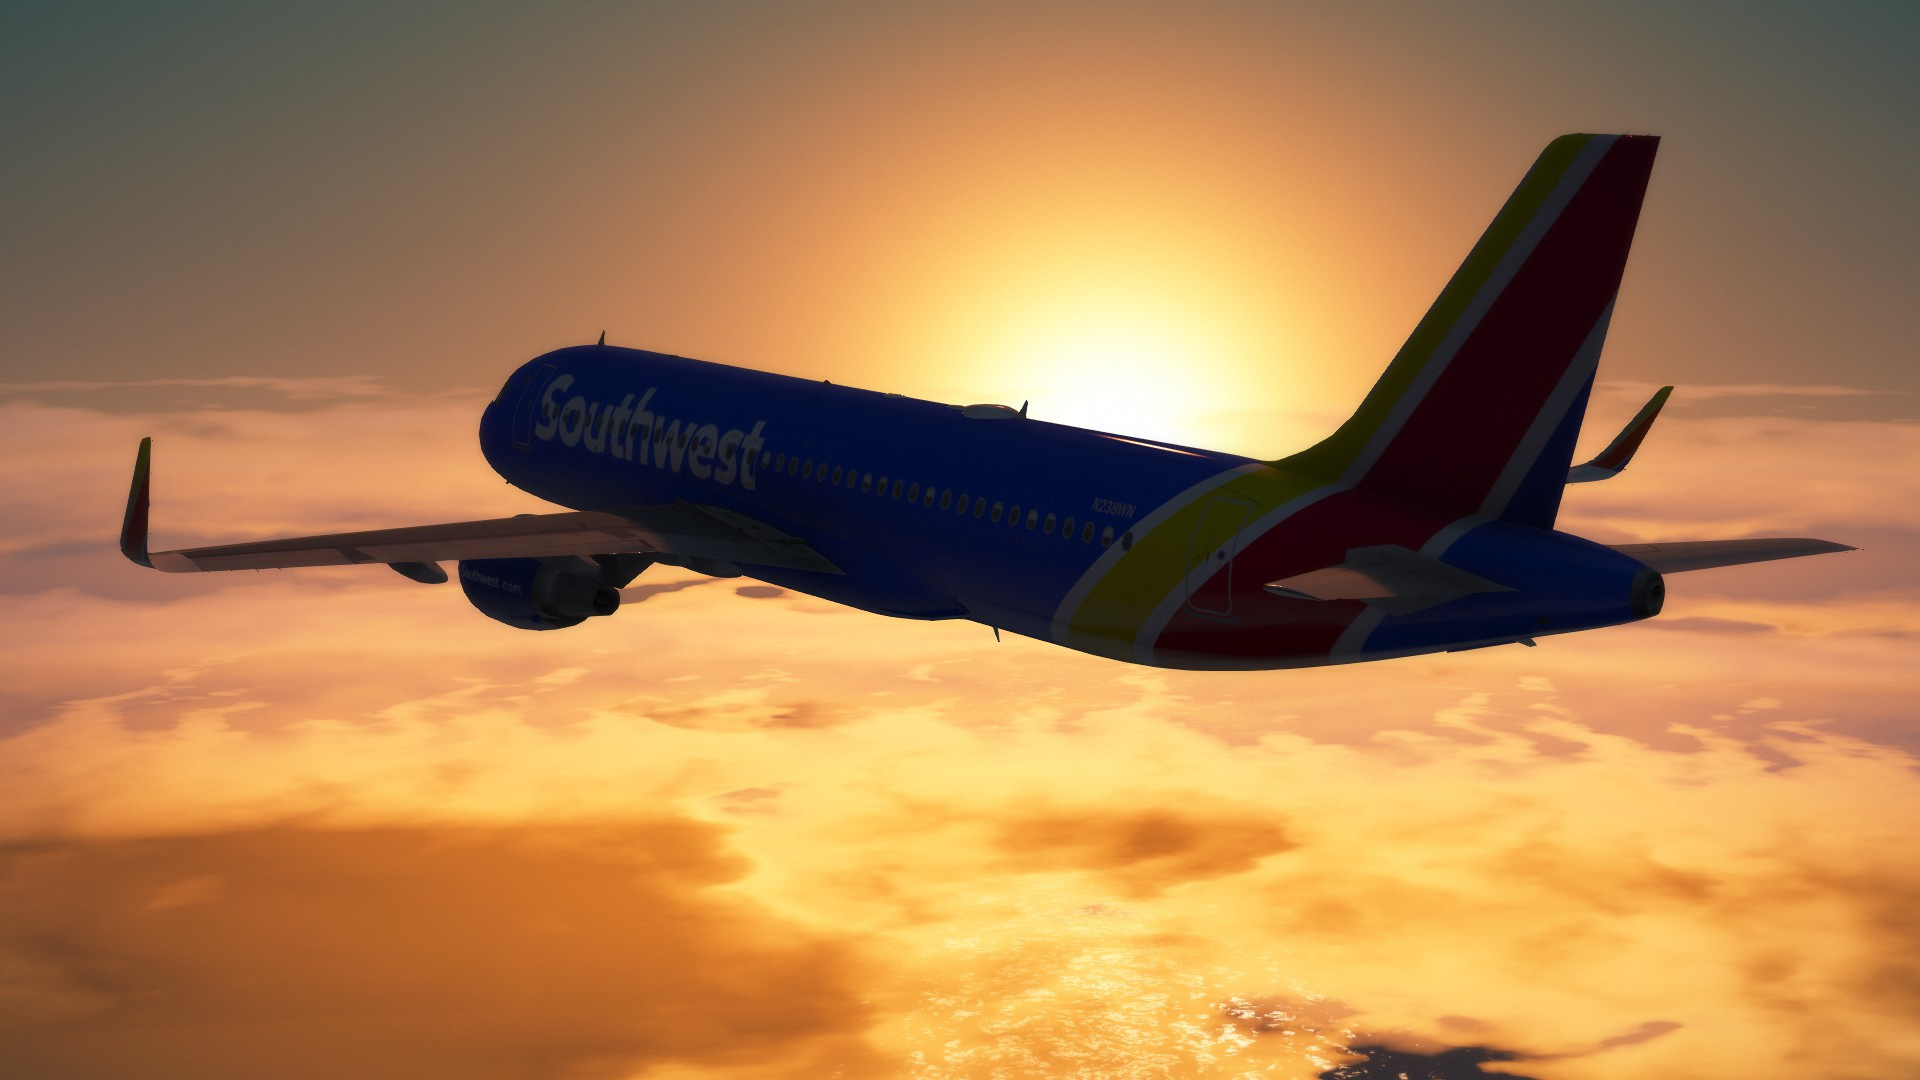 Southwest Airlines, Livery A320, A320neo, Flight experience, 1920x1080 Full HD Desktop